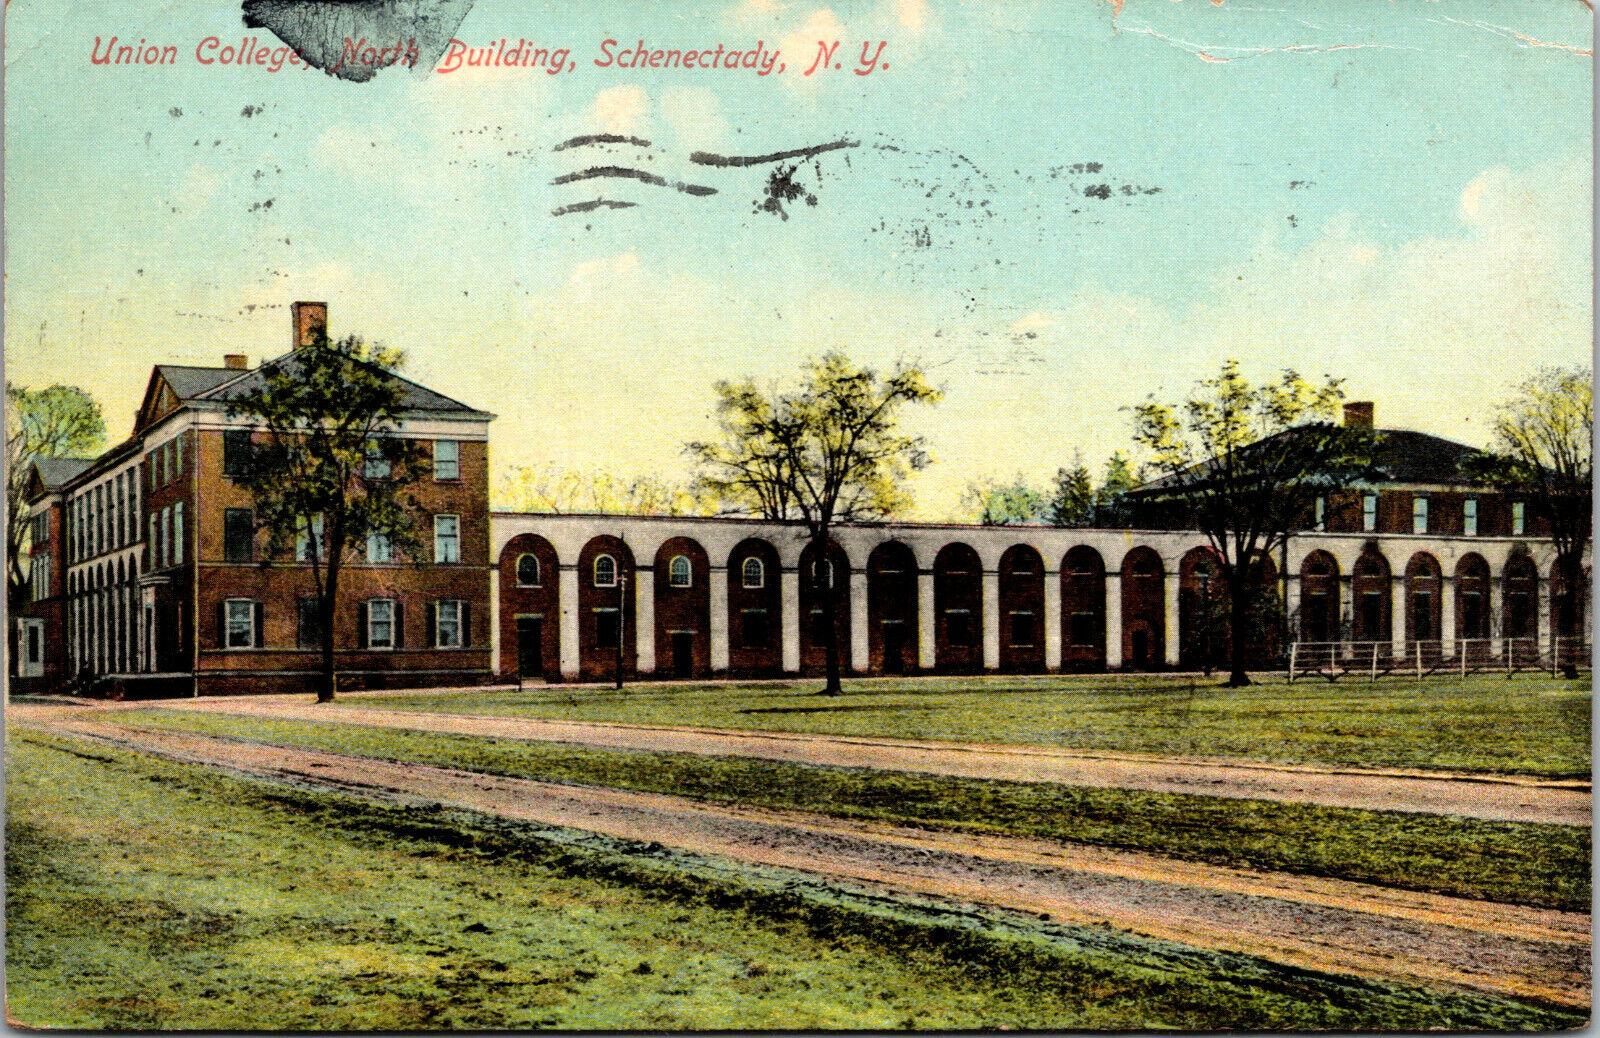 Vtg 1910s Union College North Building Schenectady New York NY Postcard